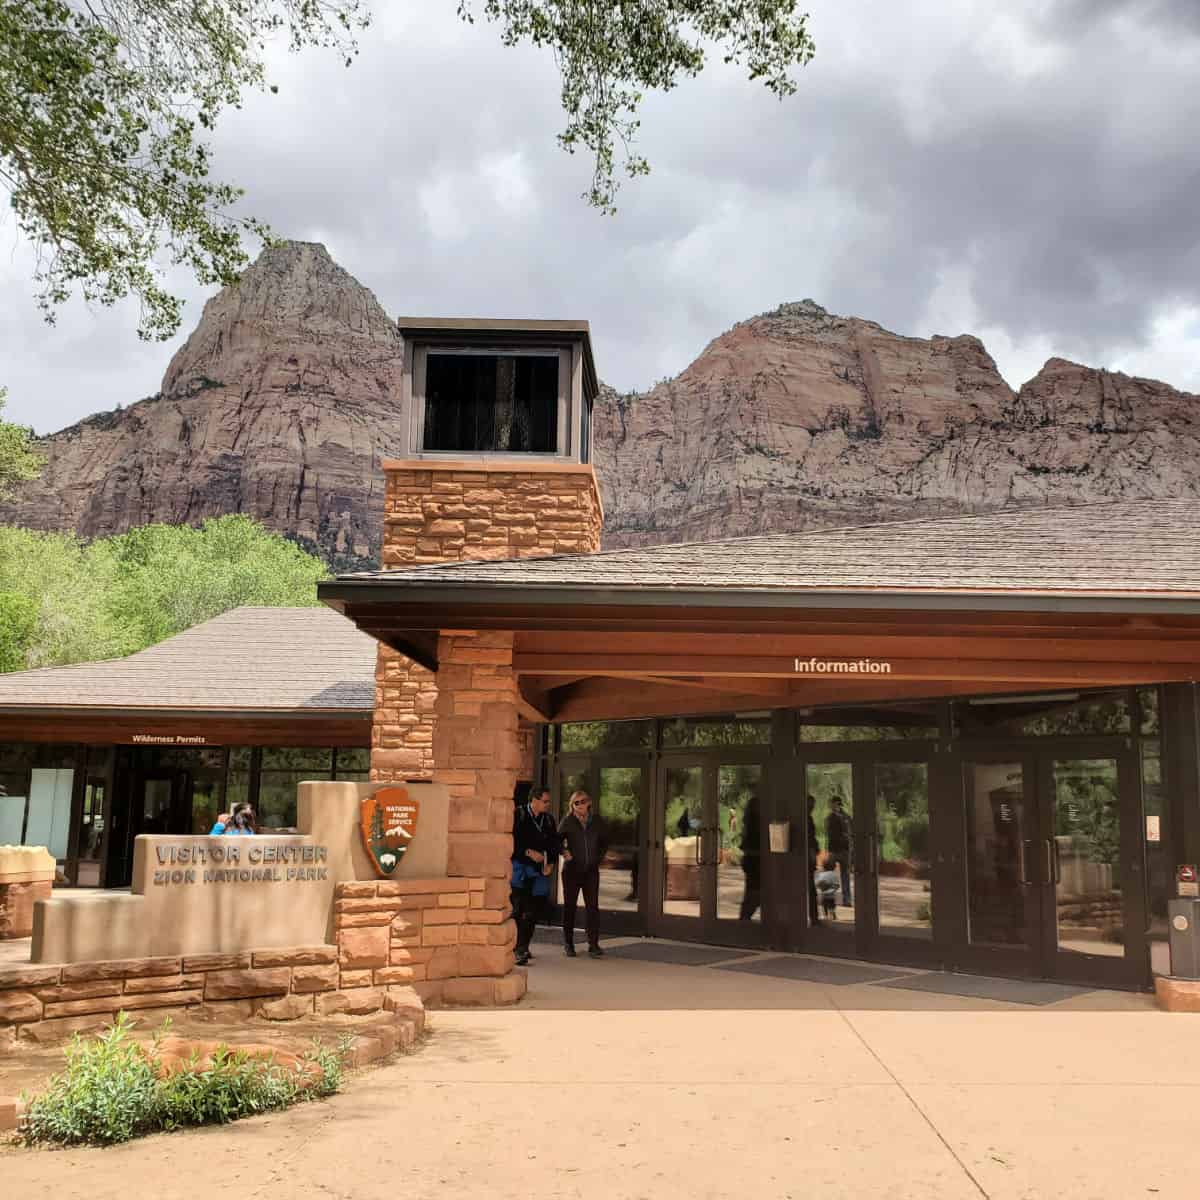 The Zion Canyon Visitor Center at the South Entrance of Zion National Park in Utah